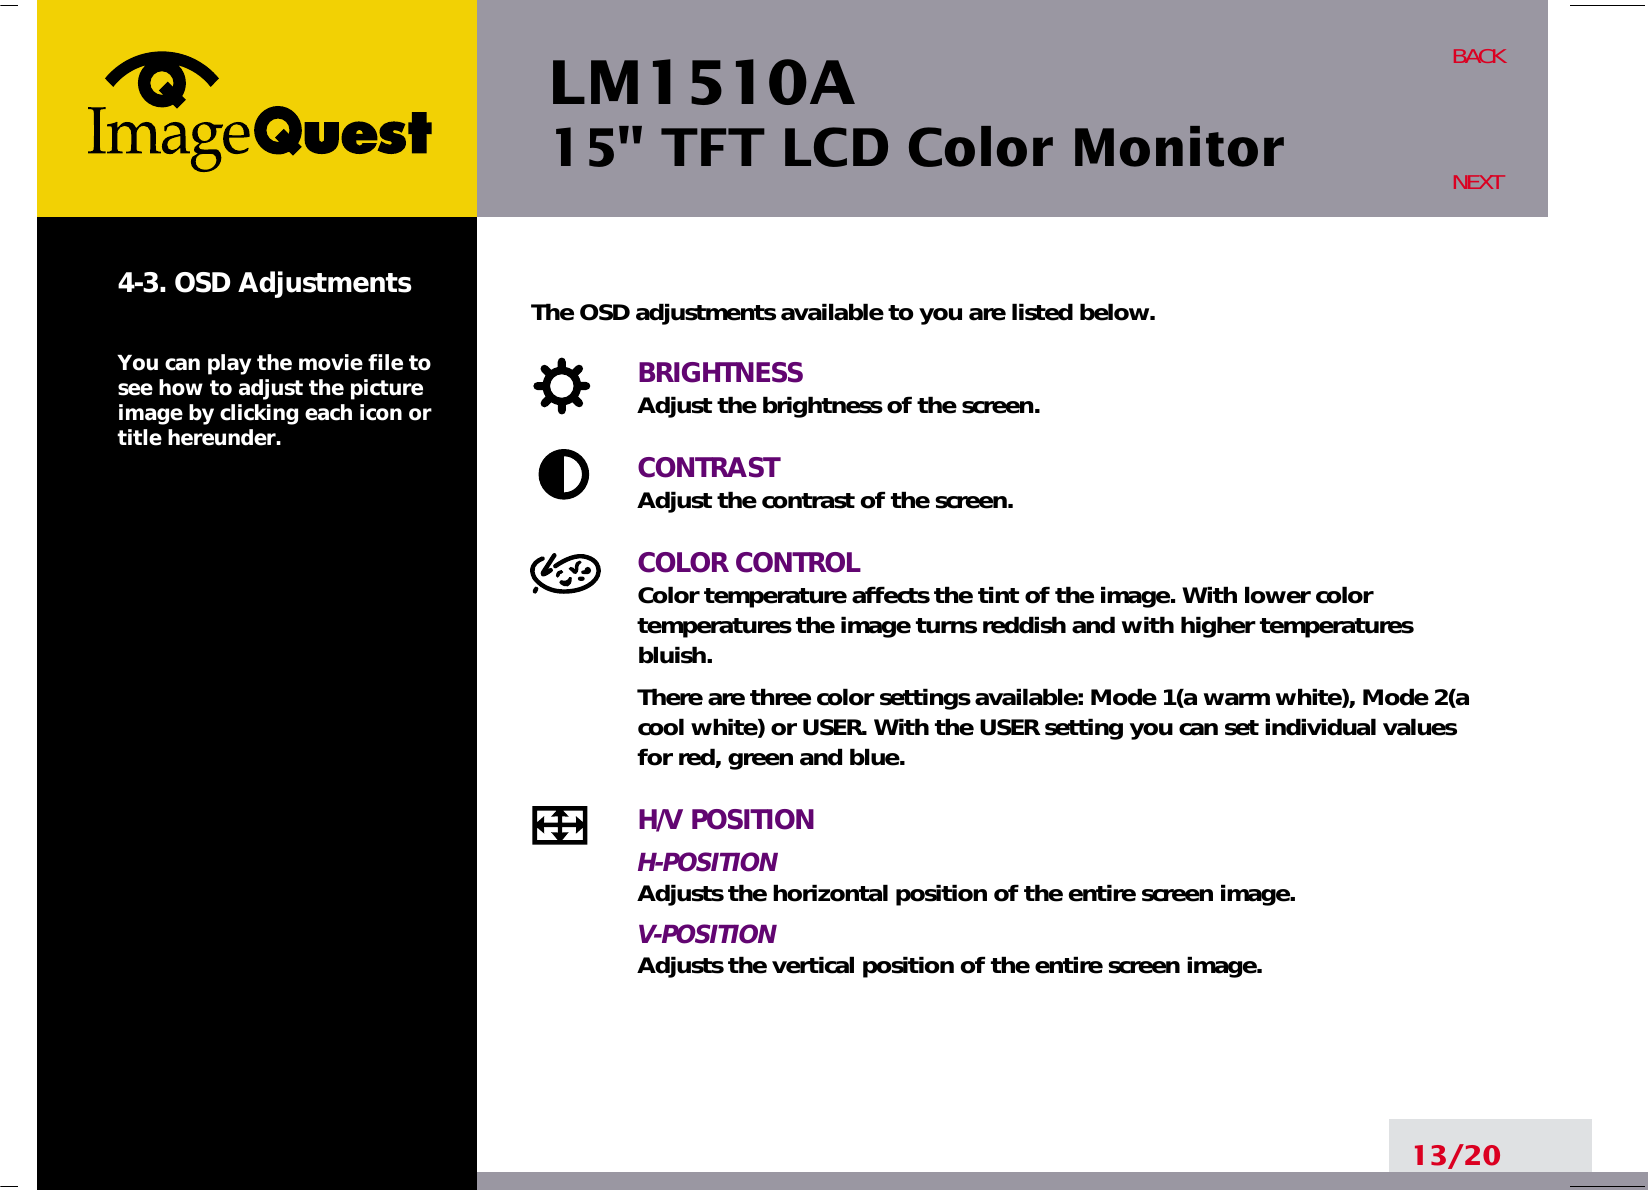 LM1510A15&quot; TFT LCD Color Monitor13/20BACKNEXT4-3. OSD AdjustmentsYou can play the movie file tosee how to adjust the pictureimage by clicking each icon ortitle hereunder.The OSD adjustments available to you are listed below.BRIGHTNESSAdjust the brightness of the screen.CONTRASTAdjust the contrast of the screen.COLOR CONTROLColor temperature affects the tint of the image. With lower color temperatures the image turns reddish and with higher temperatures bluish.There are three color settings available: Mode 1(a warm white), Mode 2(acool white) or USER. With the USER setting you can set individual valuesfor red, green and blue.H/V POSITIONH-POSITIONAdjusts the horizontal position of the entire screen image.V-POSITIONAdjusts the vertical position of the entire screen image.